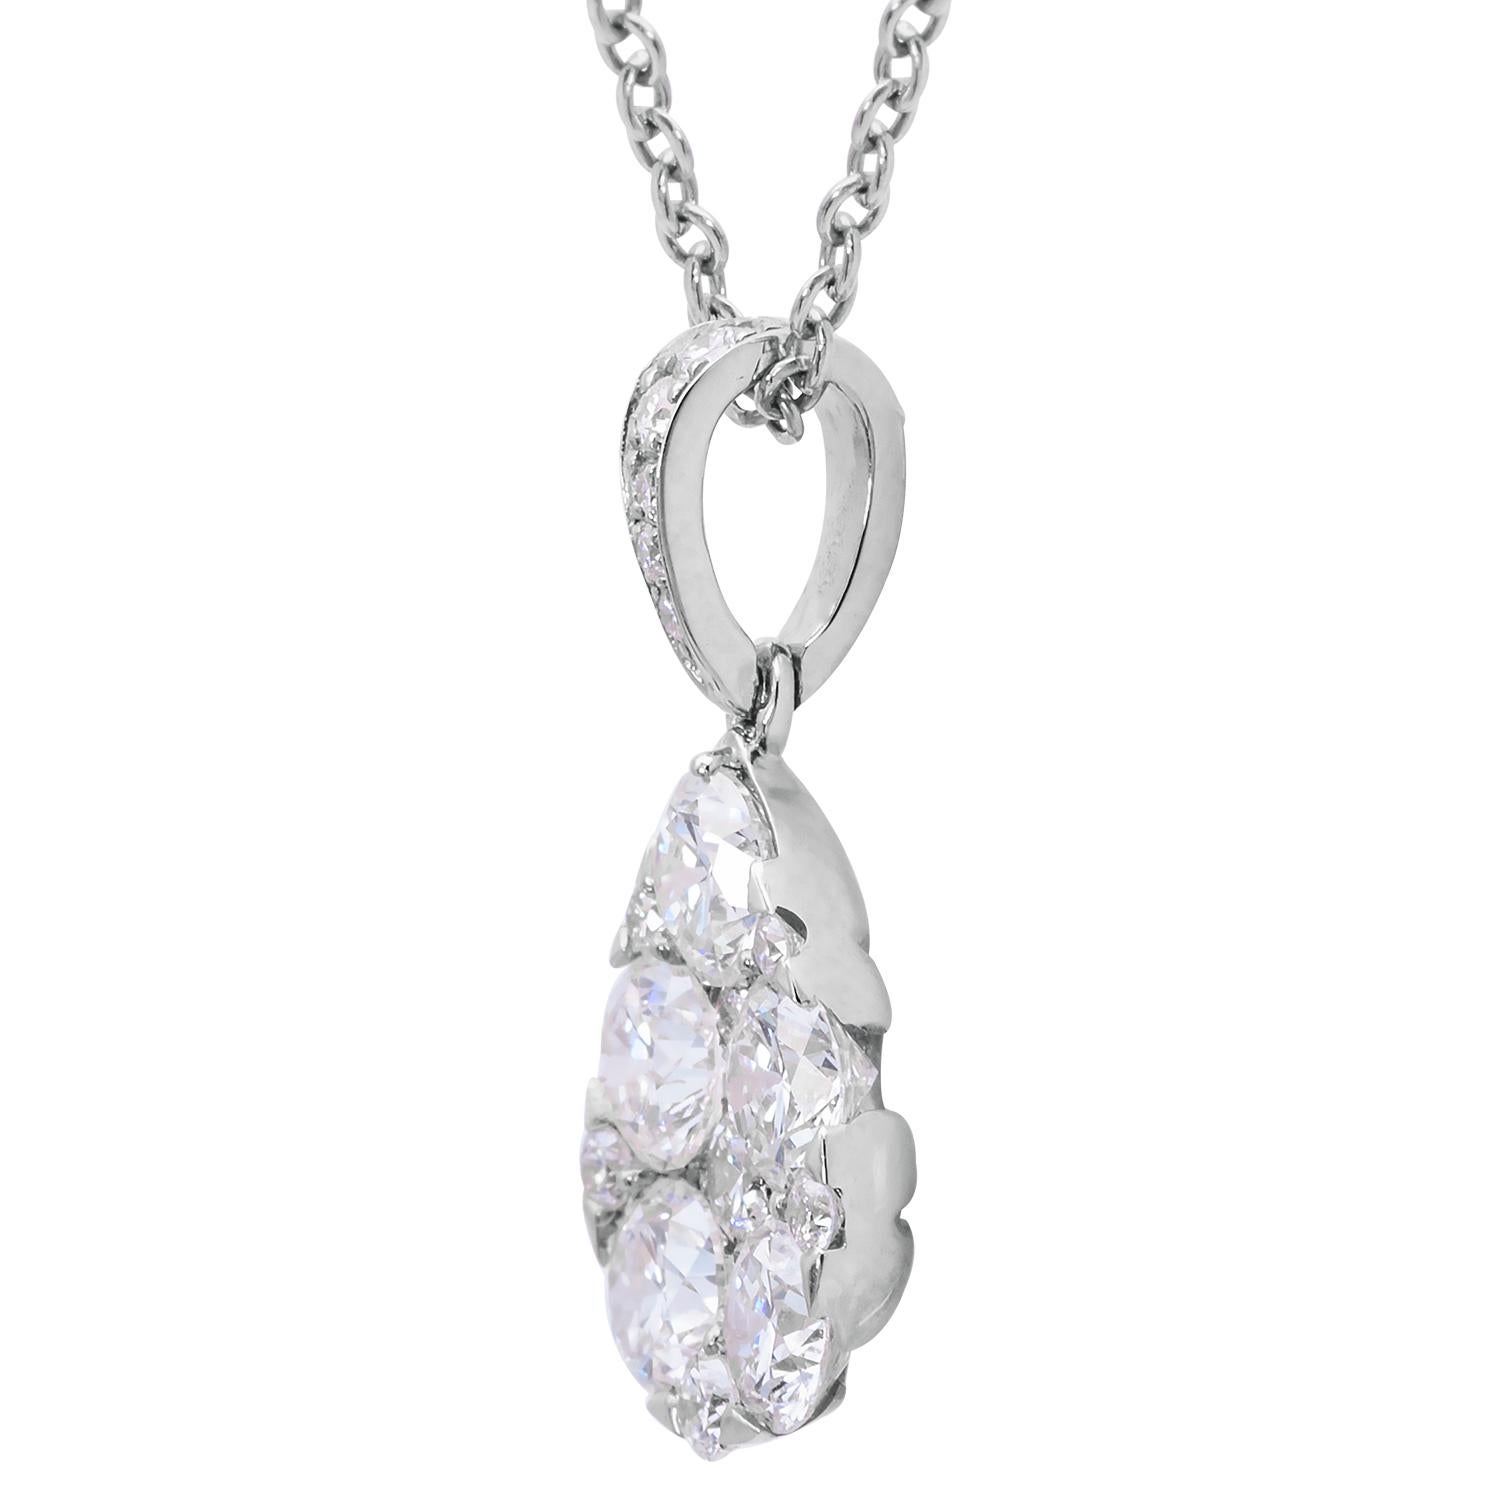 This stunning diamond pendant is made from 17 VS2, G color diamonds totaling 1.02 carats which form a tear drop shape hung from a diamond-covered bail. The diamonds are set in 1.2 grams of 18 karat white gold. This beautiful pendant is hung from an